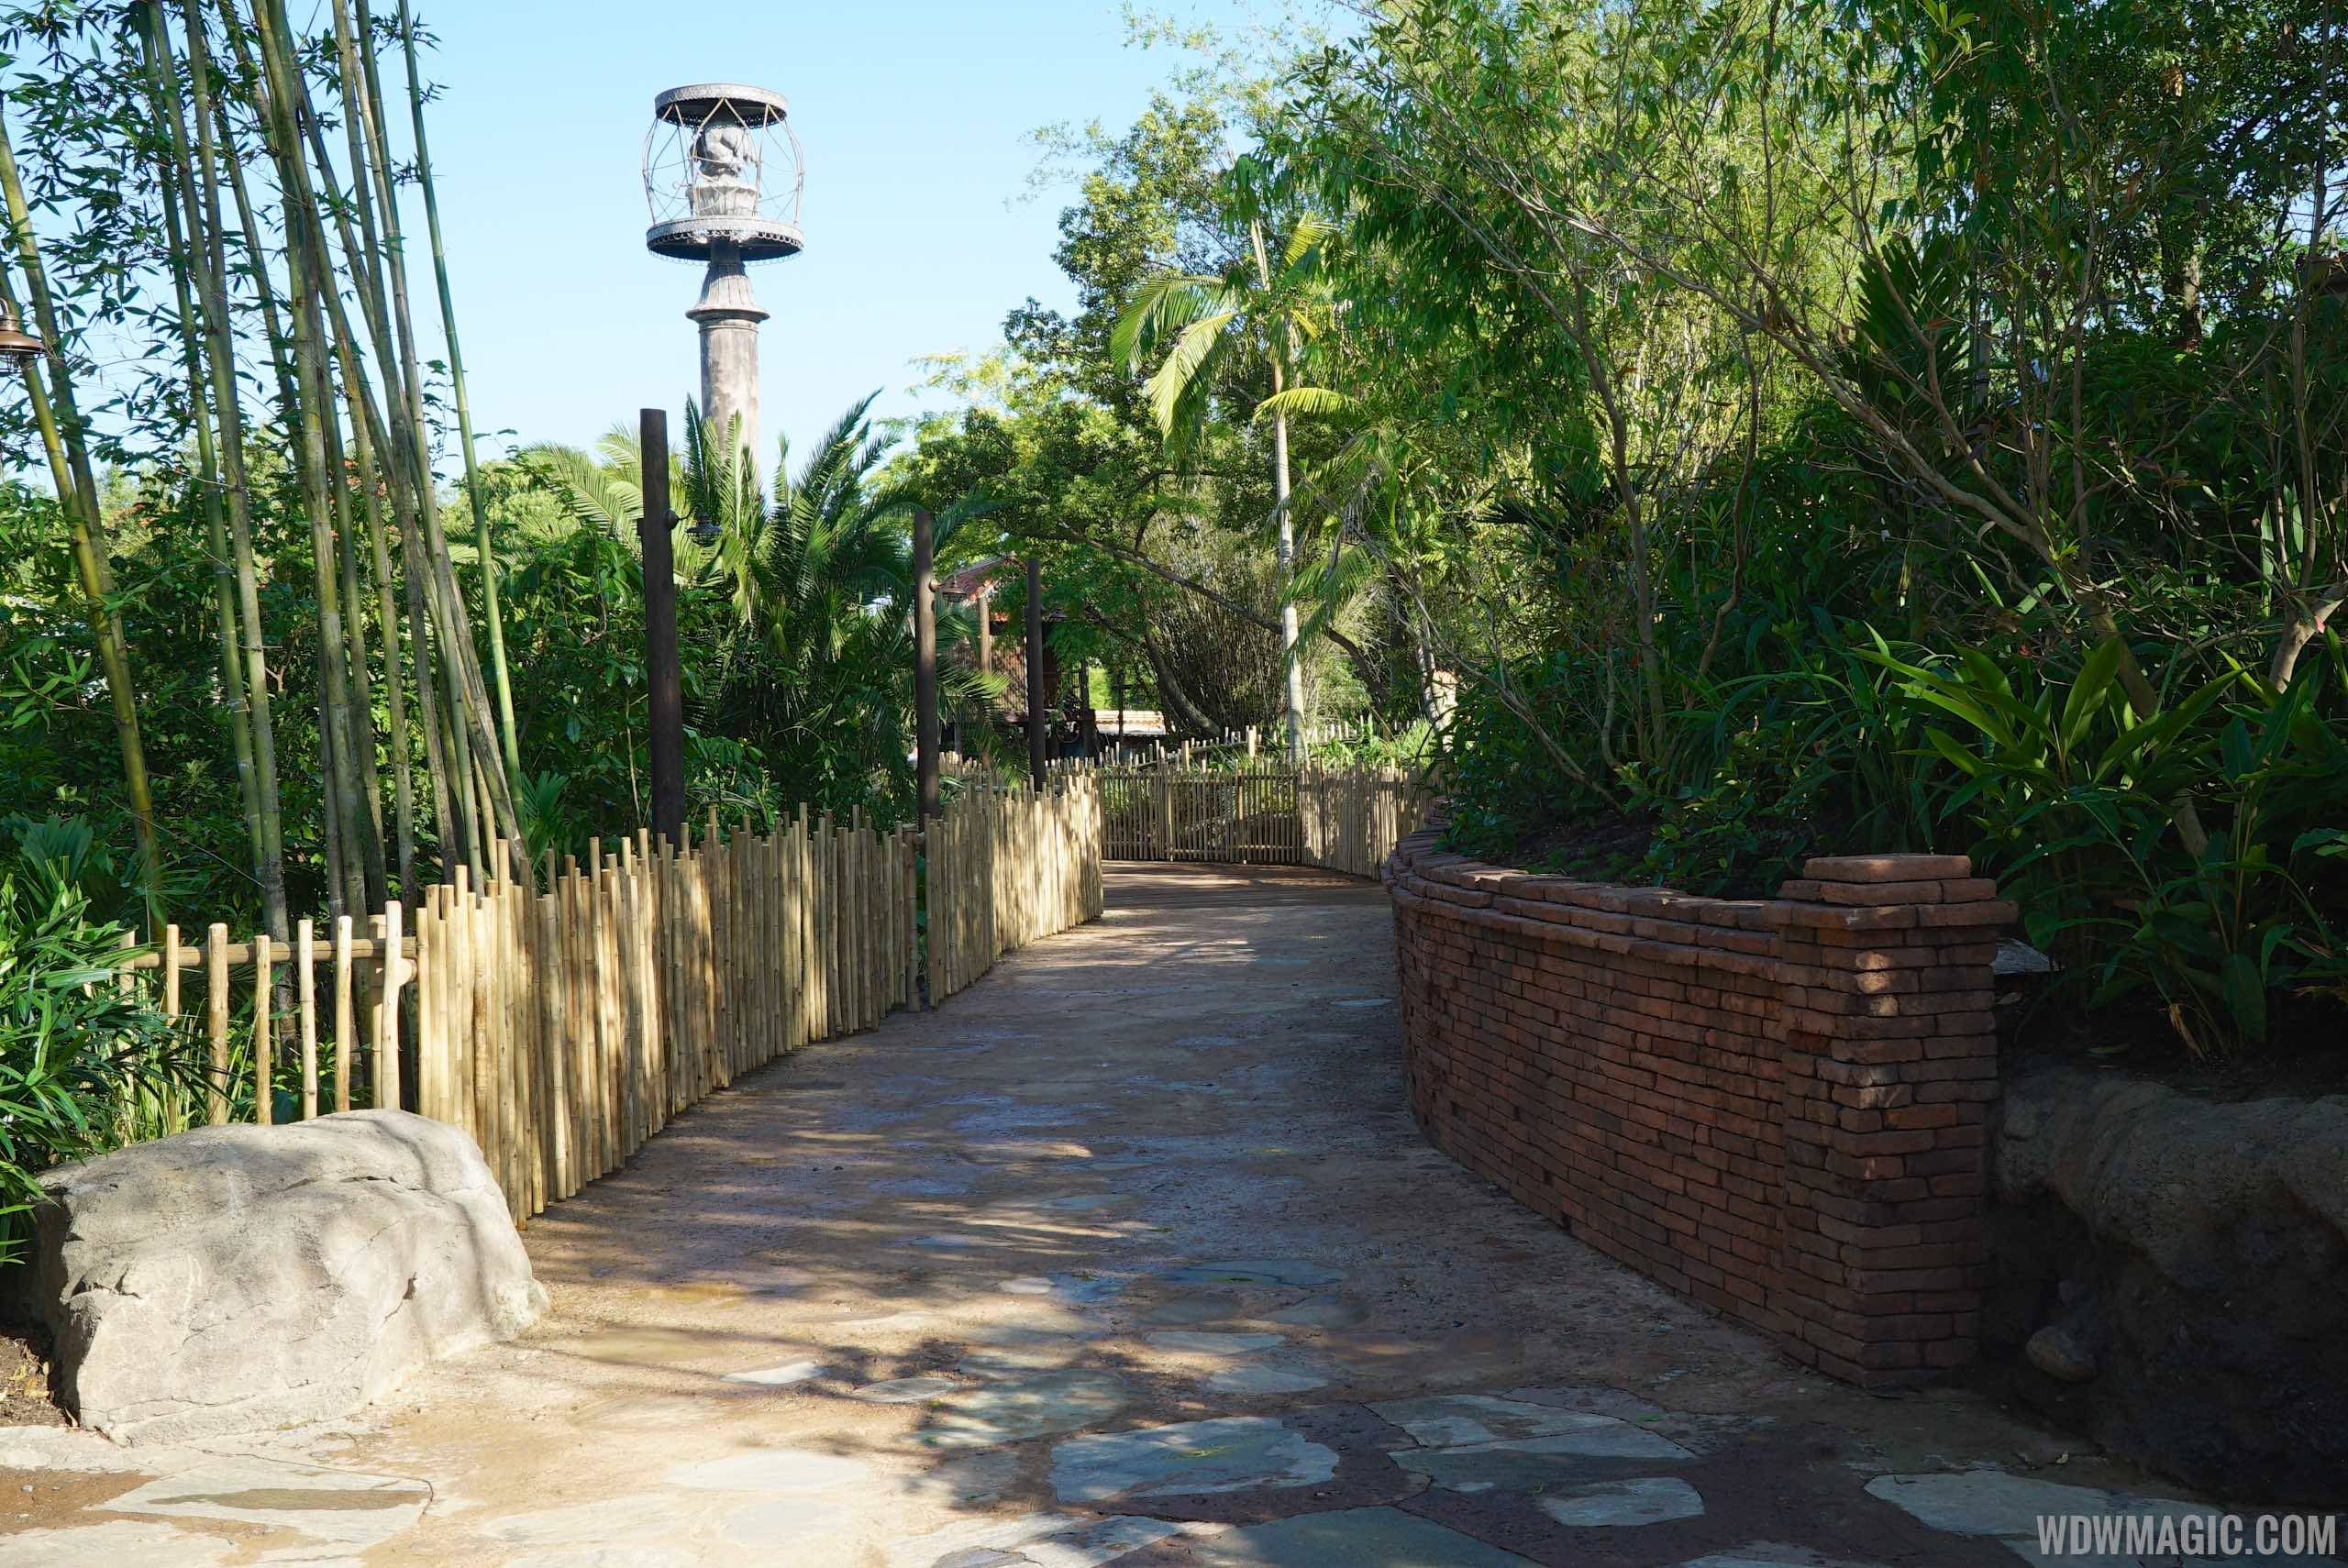 PHOTOS and VIDEO - New walkway opens in Asia at Disney's Animal Kingdom